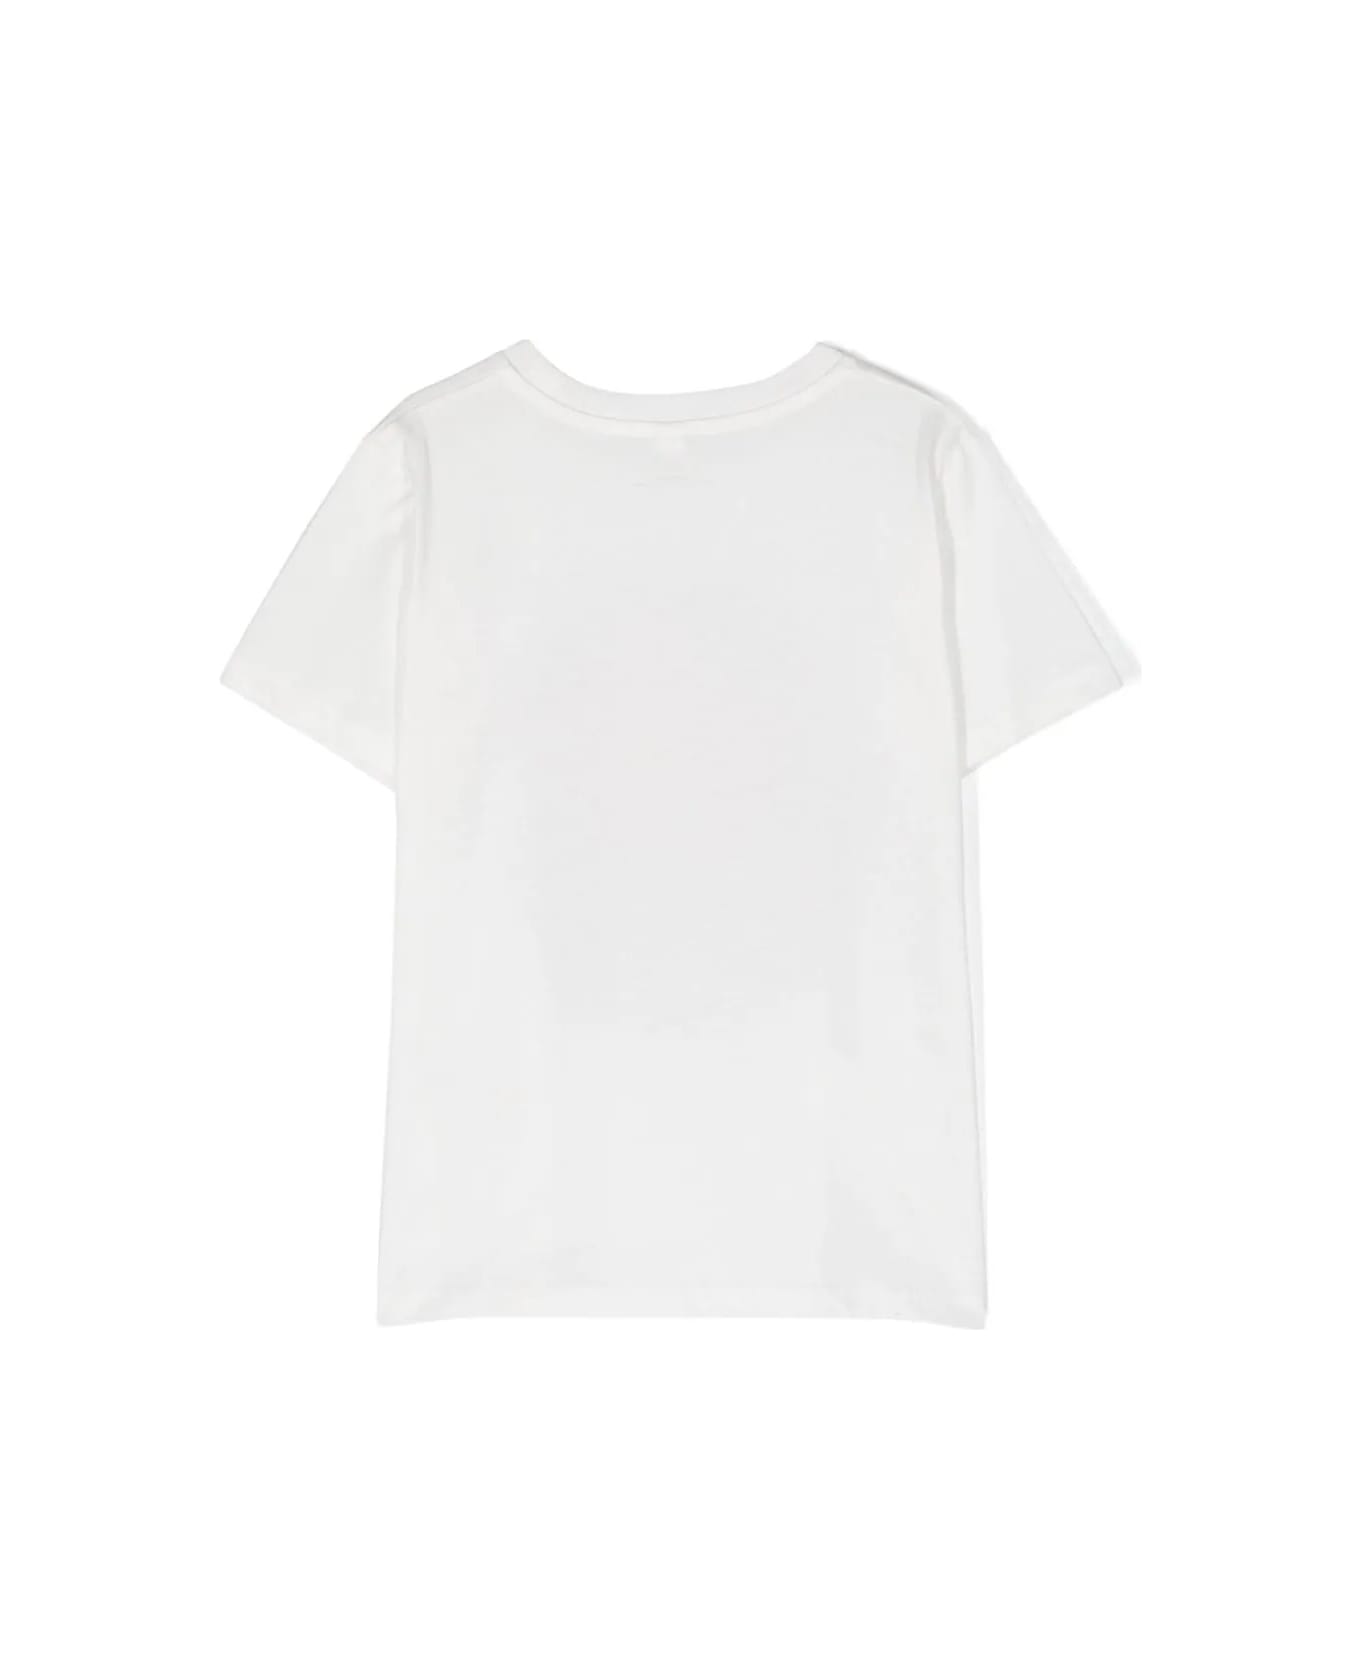 Stella McCartney Kids White T-shirt With Disc With Shell Logo - White